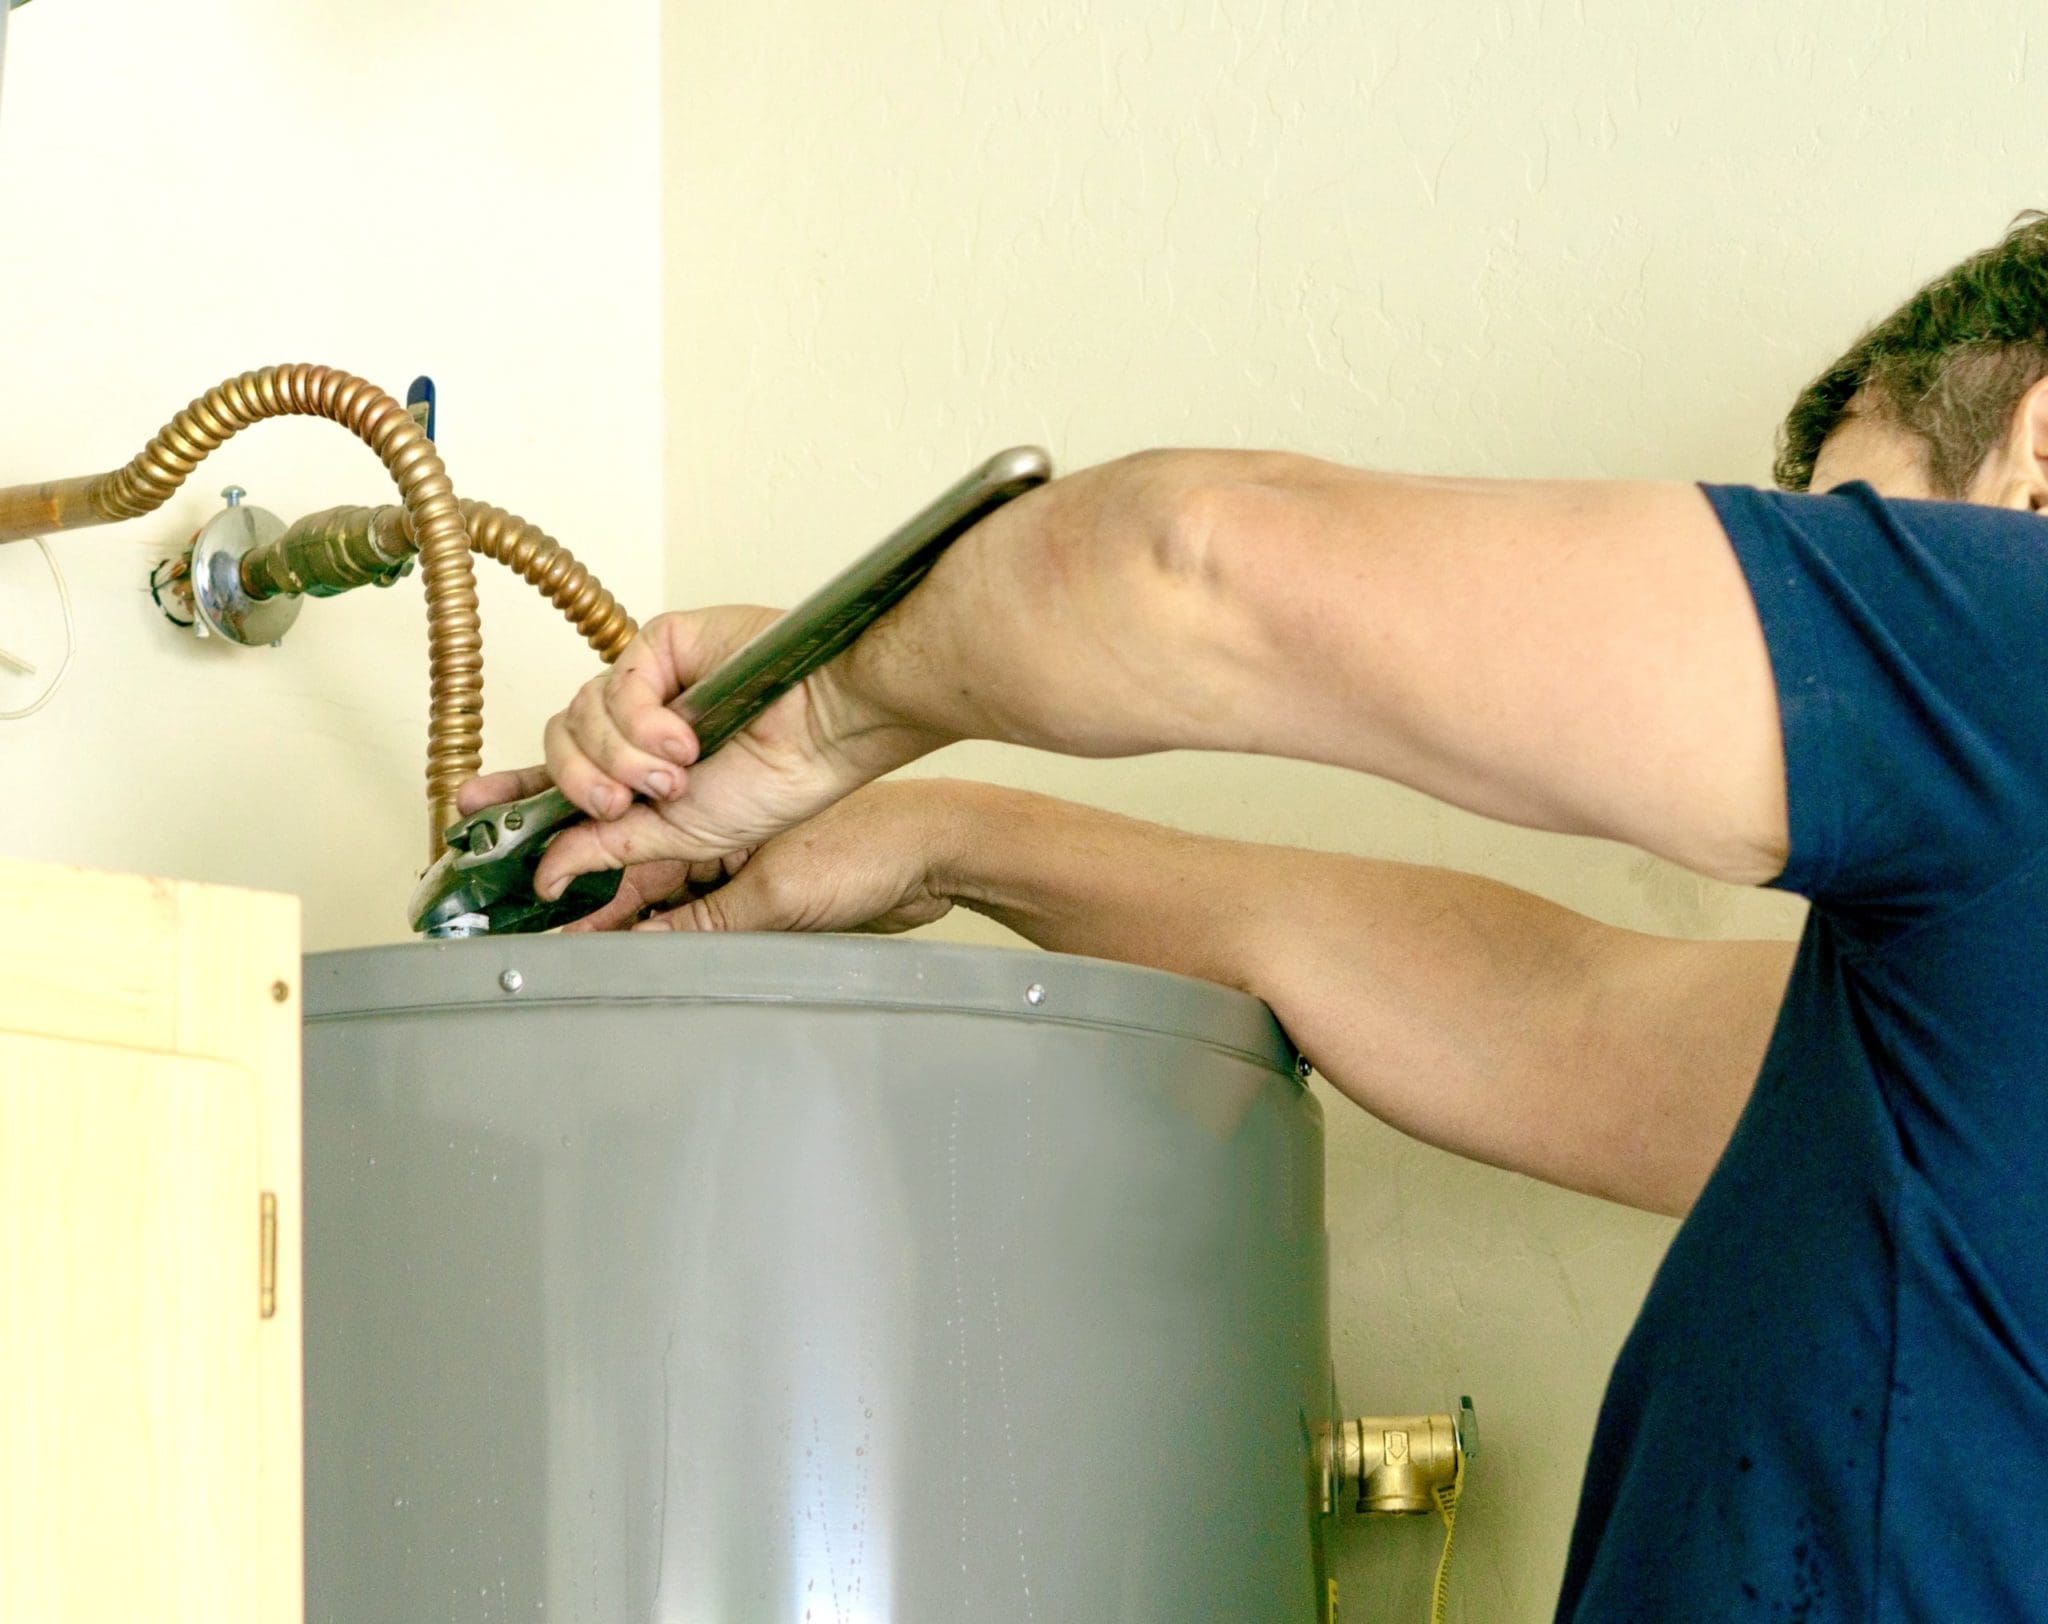 How To Tell If a Hot Water Heater Is Bad